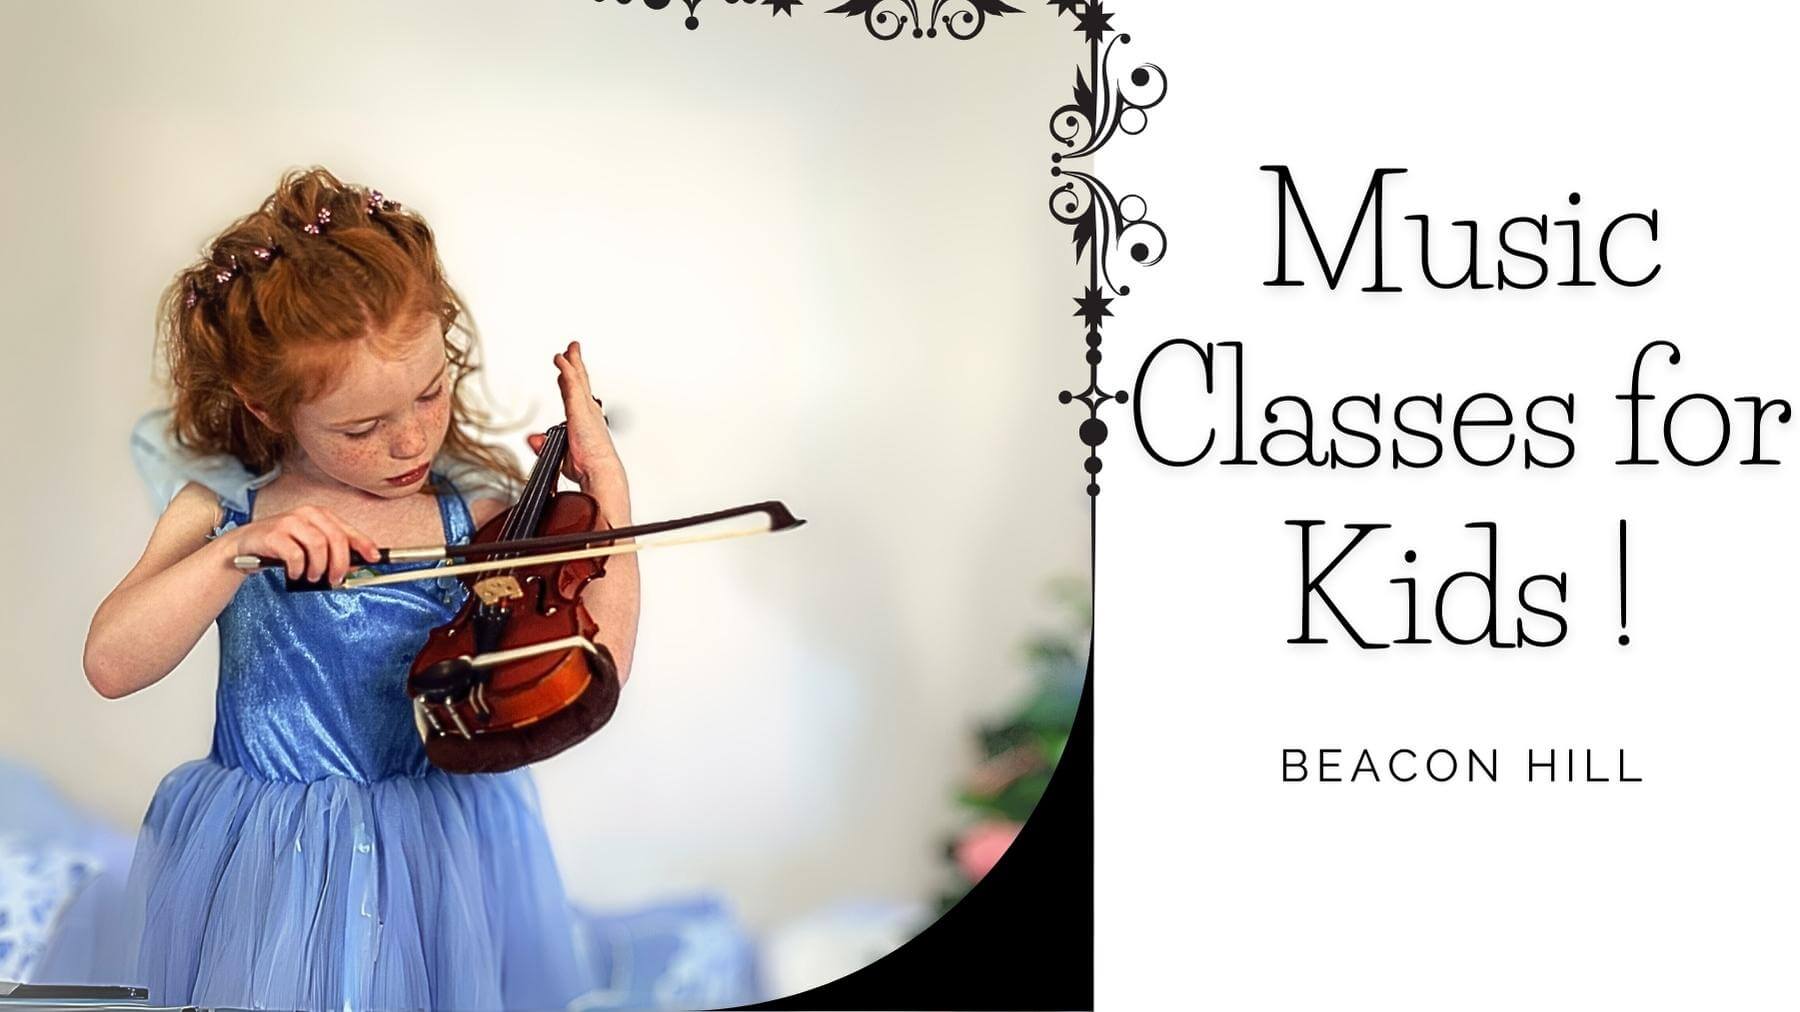 Music Classes for Kids in Beacon Hill, Massachusetts: A Fun and Educational Experience